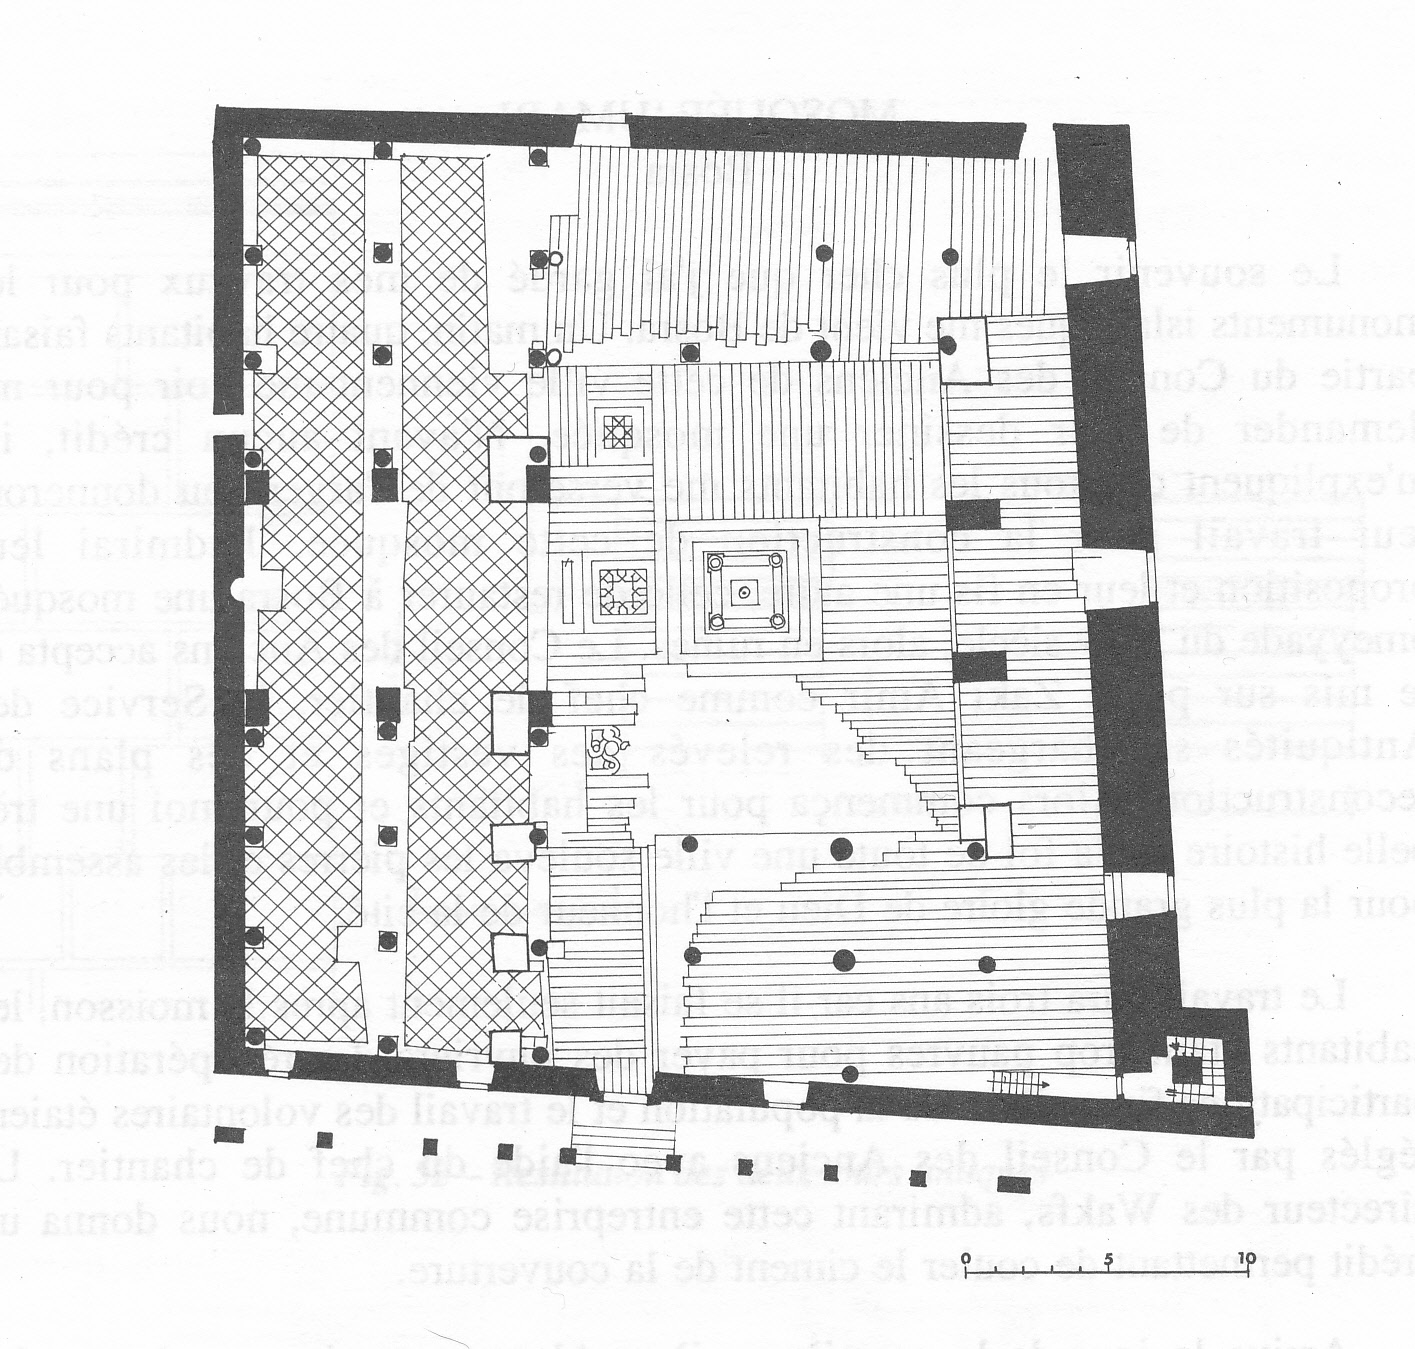 Site plan - elements blocked out in black representing what has been conseverved